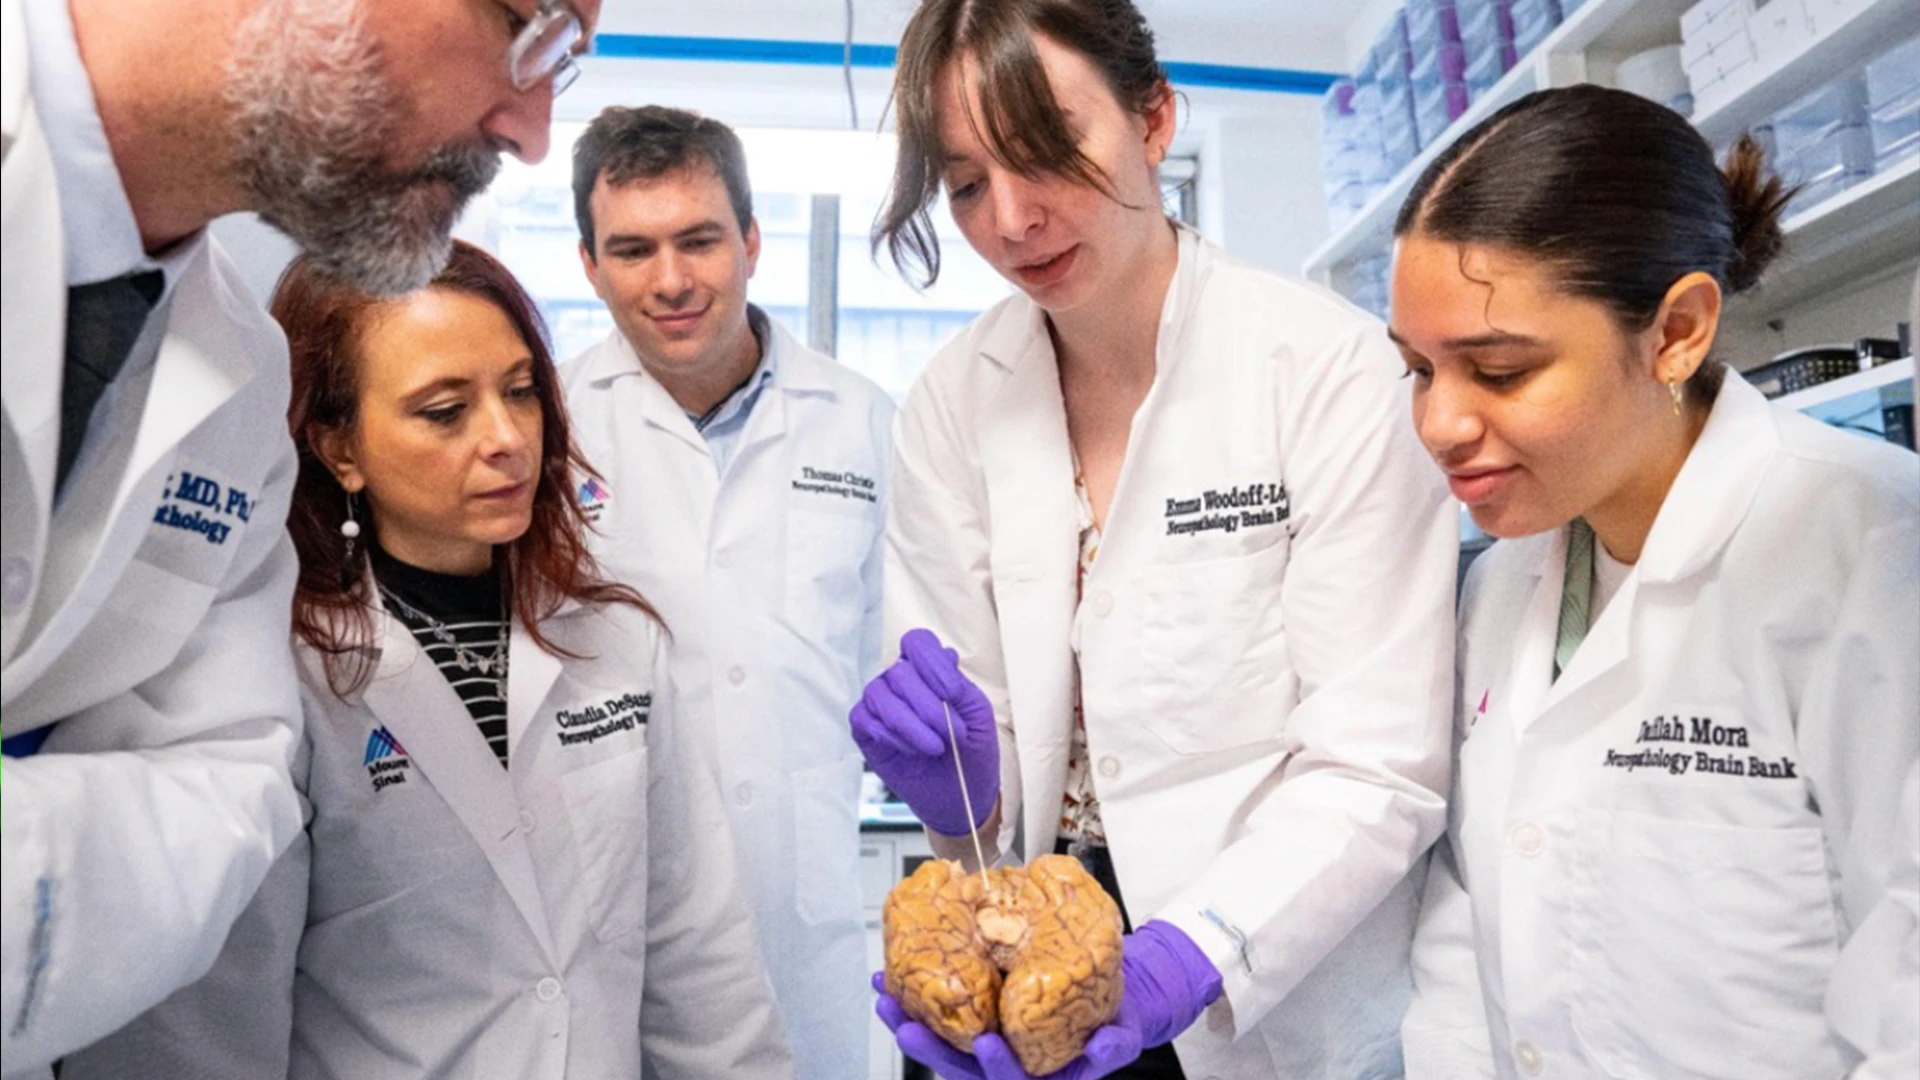 The Mount Sinai brain bank is a nexus for teaching. John Crary, MD, PhD, left, hosts sessions with trainees who are interested in a career in translational brain science.